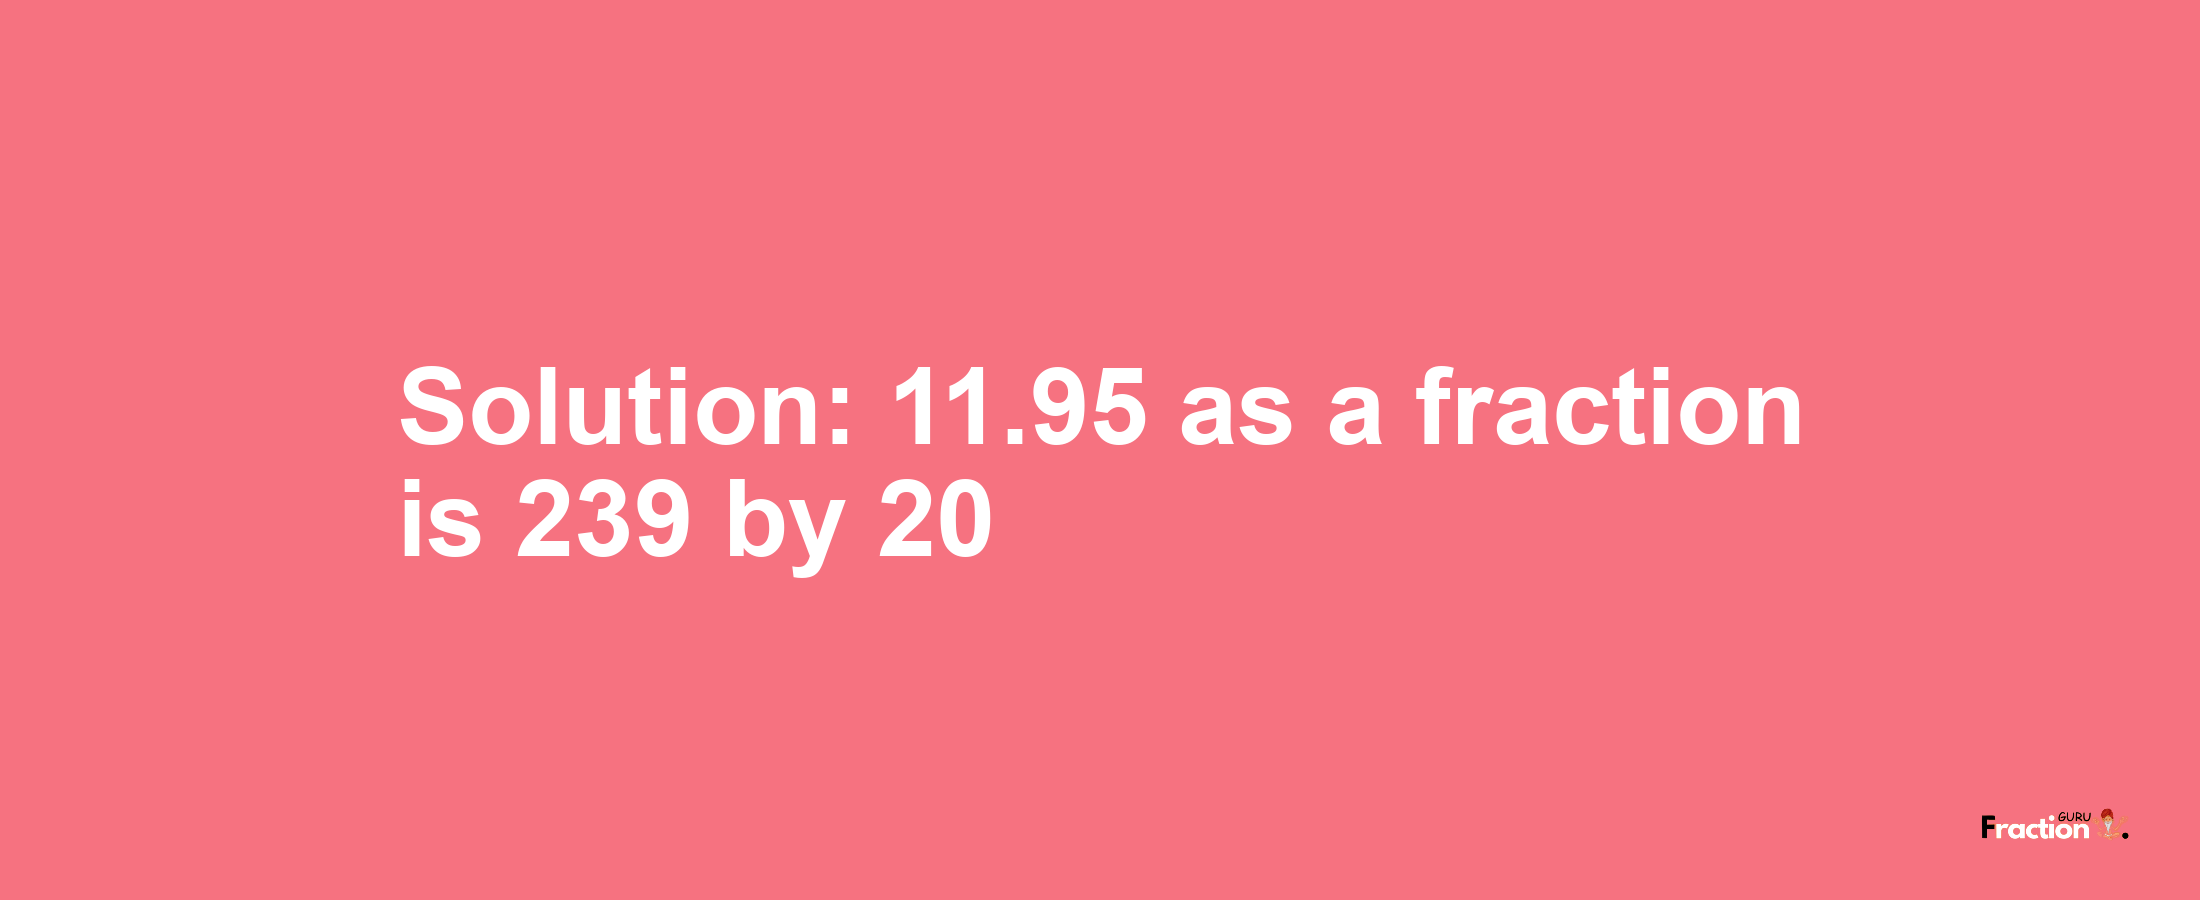 Solution:11.95 as a fraction is 239/20